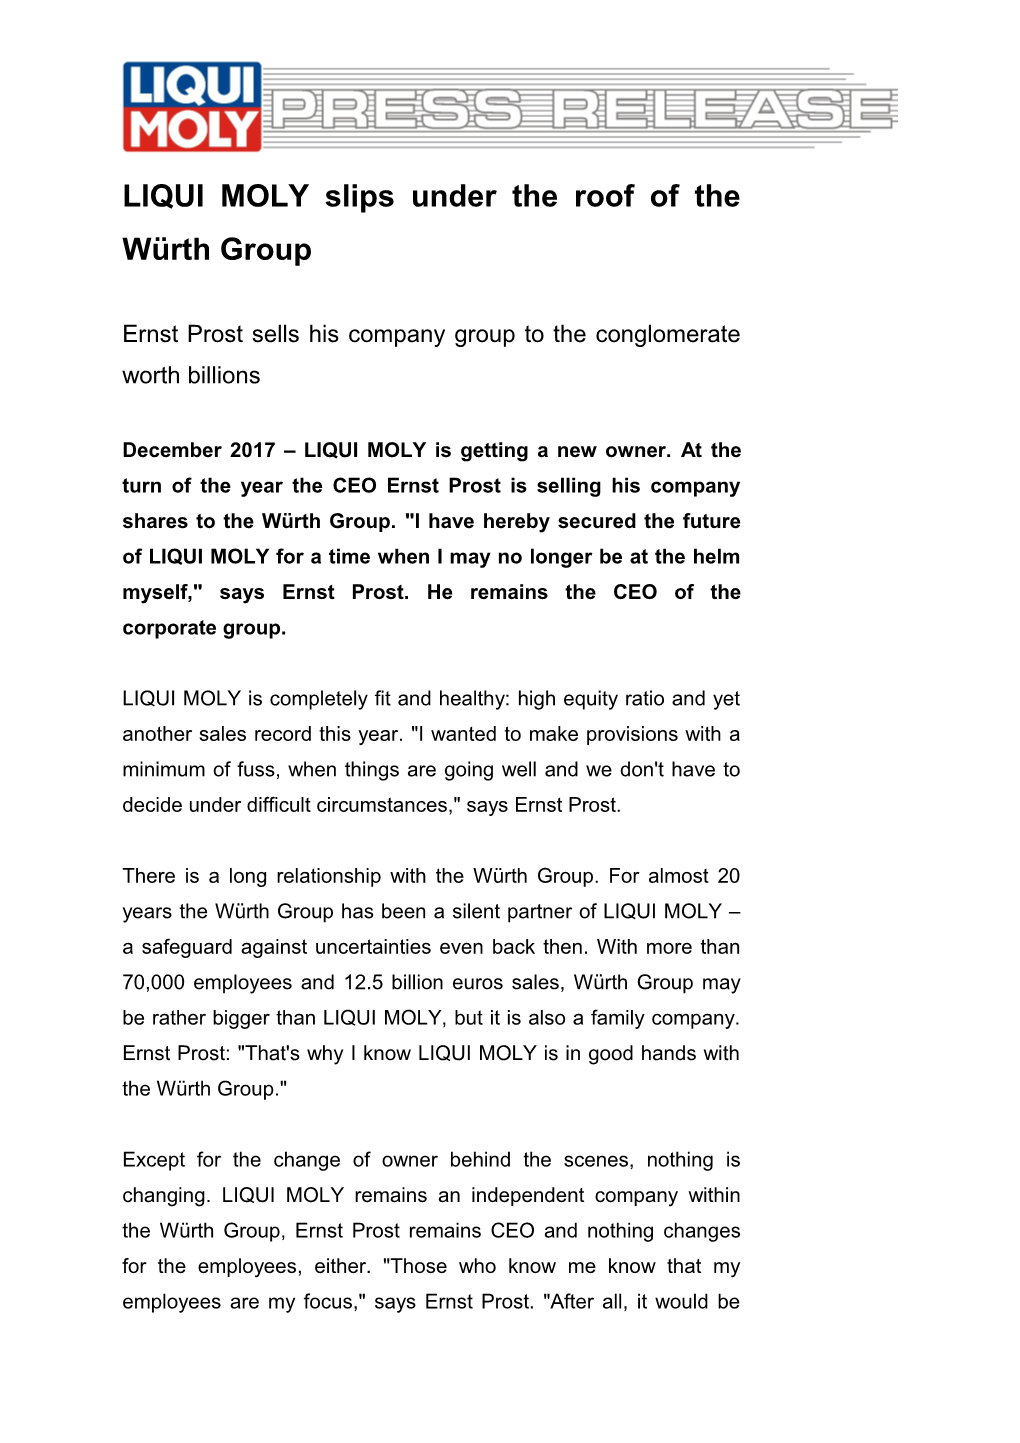 LIQUI MOLY Slips Under the Roof of the Würth Group